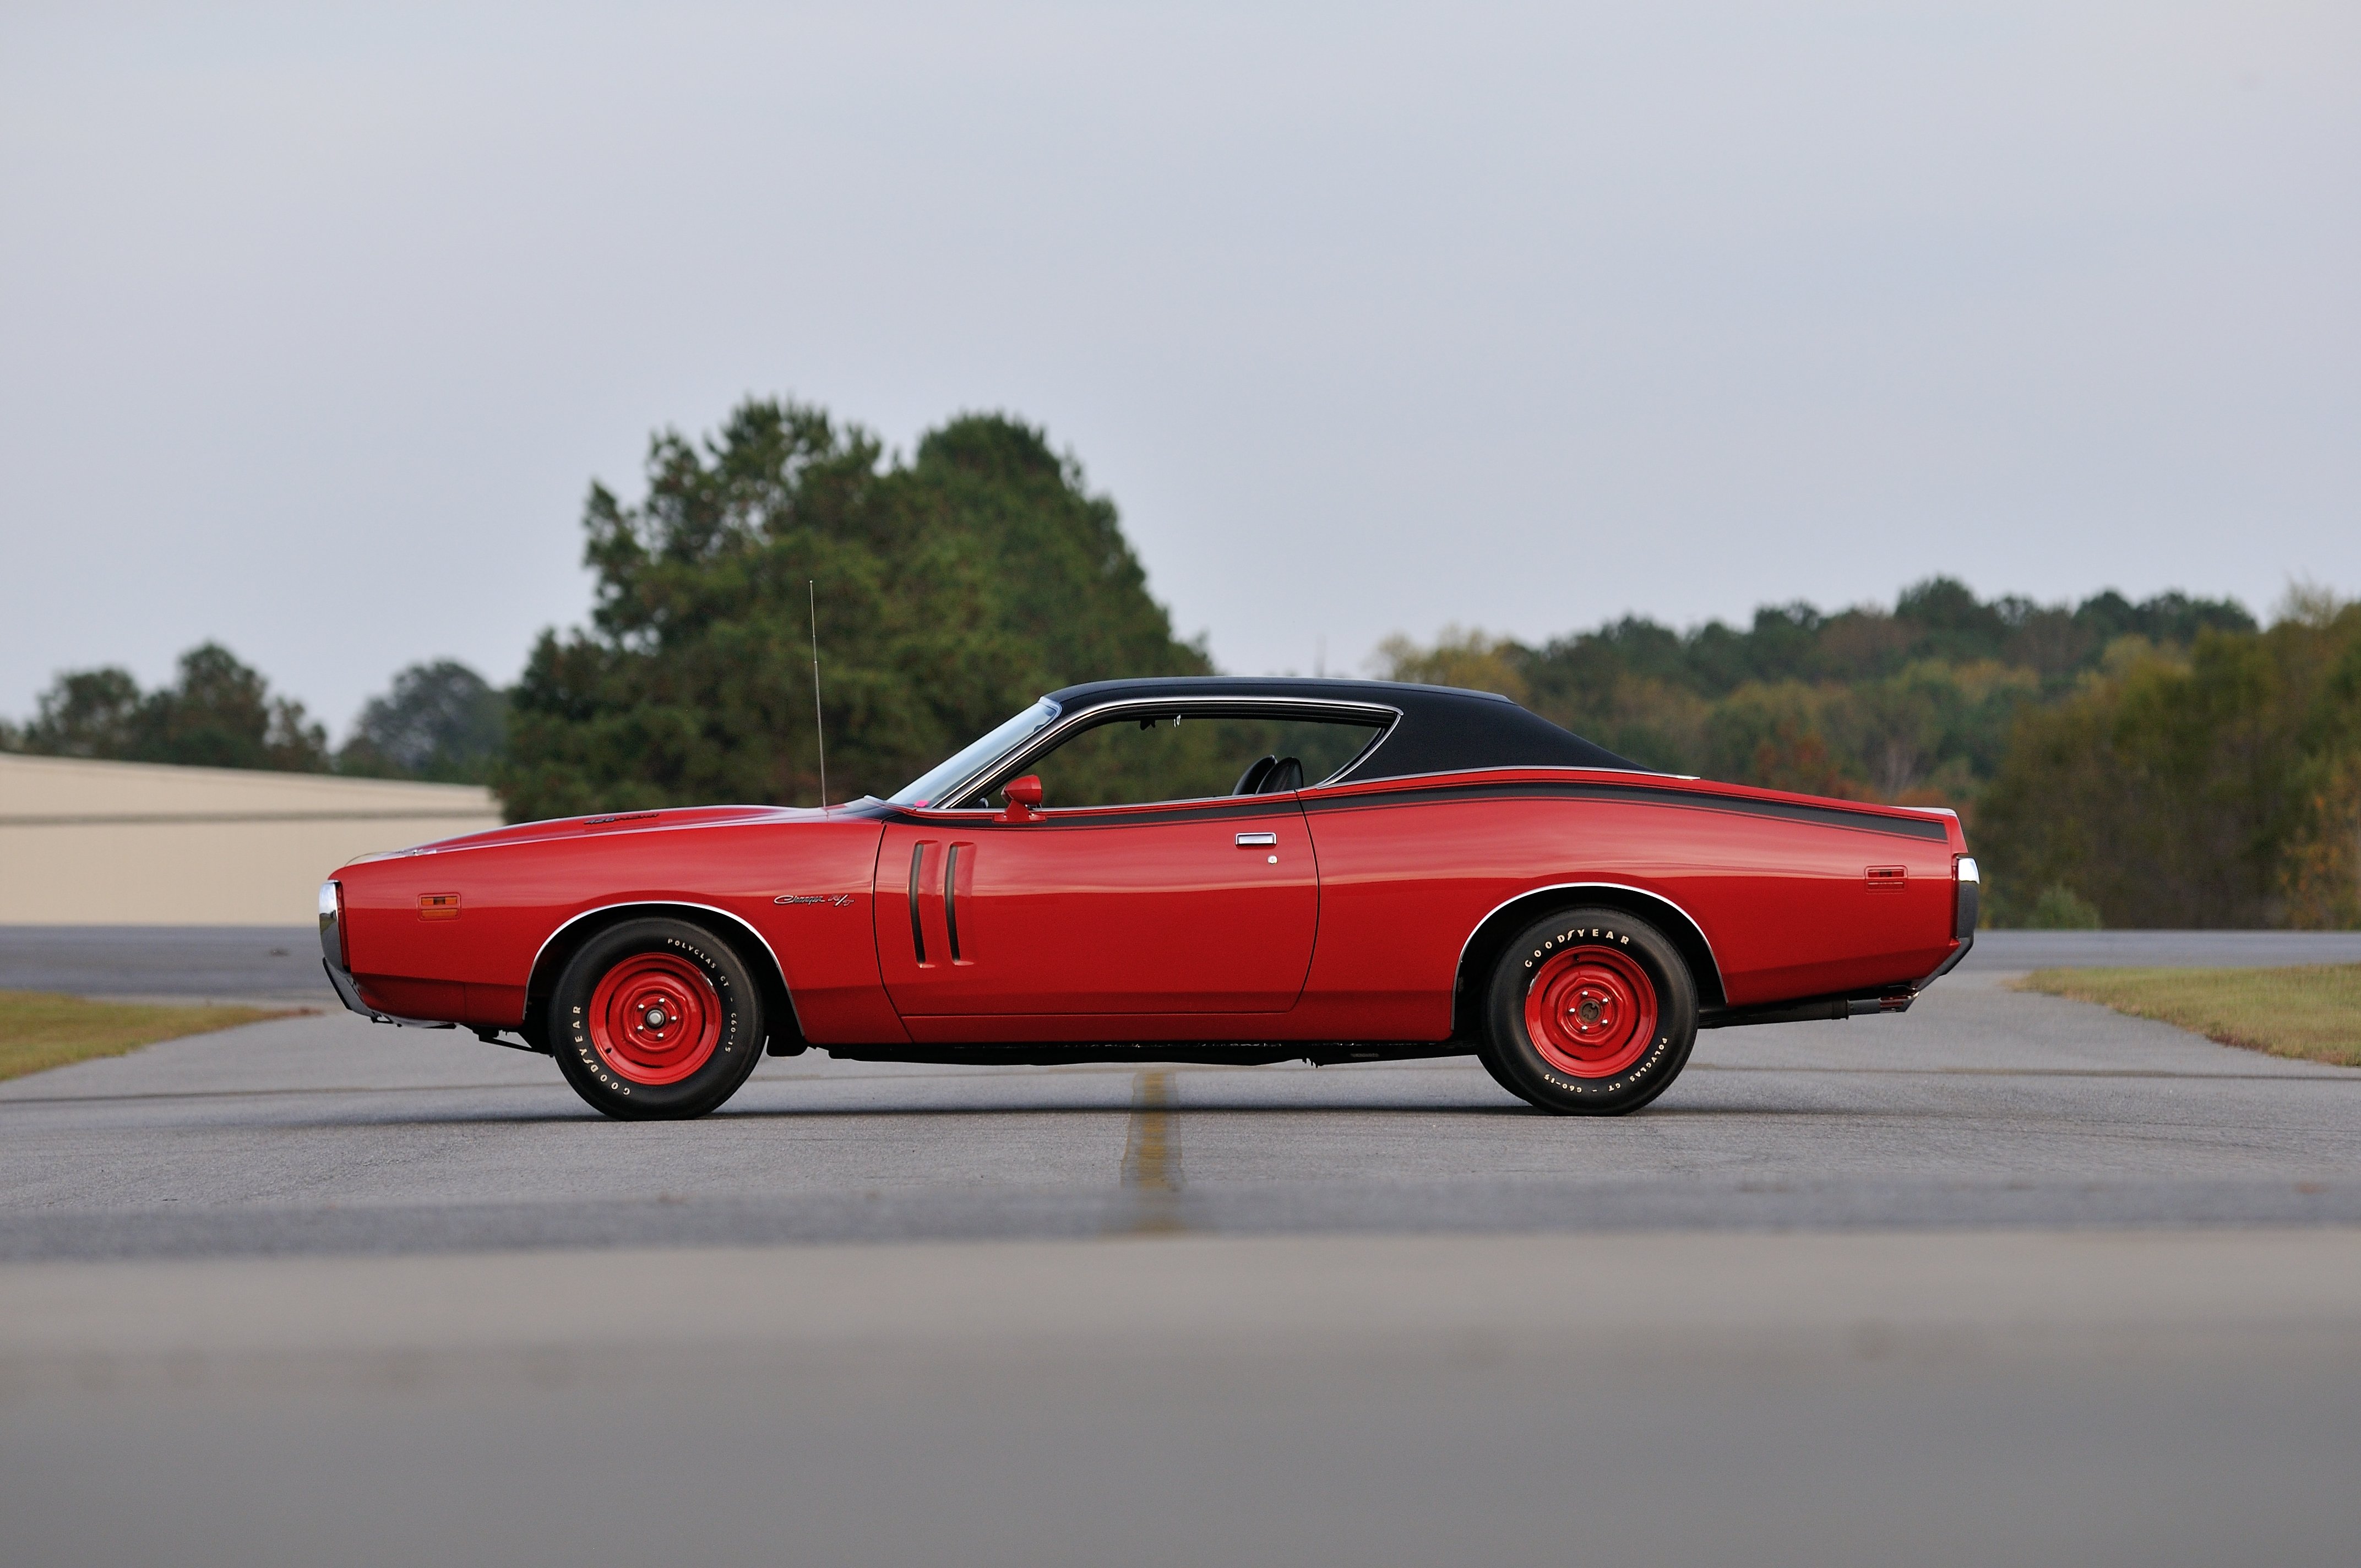 1971, Dodge, Hemi, Charger, Rt, Pilot, Car, Red, Muscle, Classic, Old, Usa, 4288x2848 02 Wallpaper